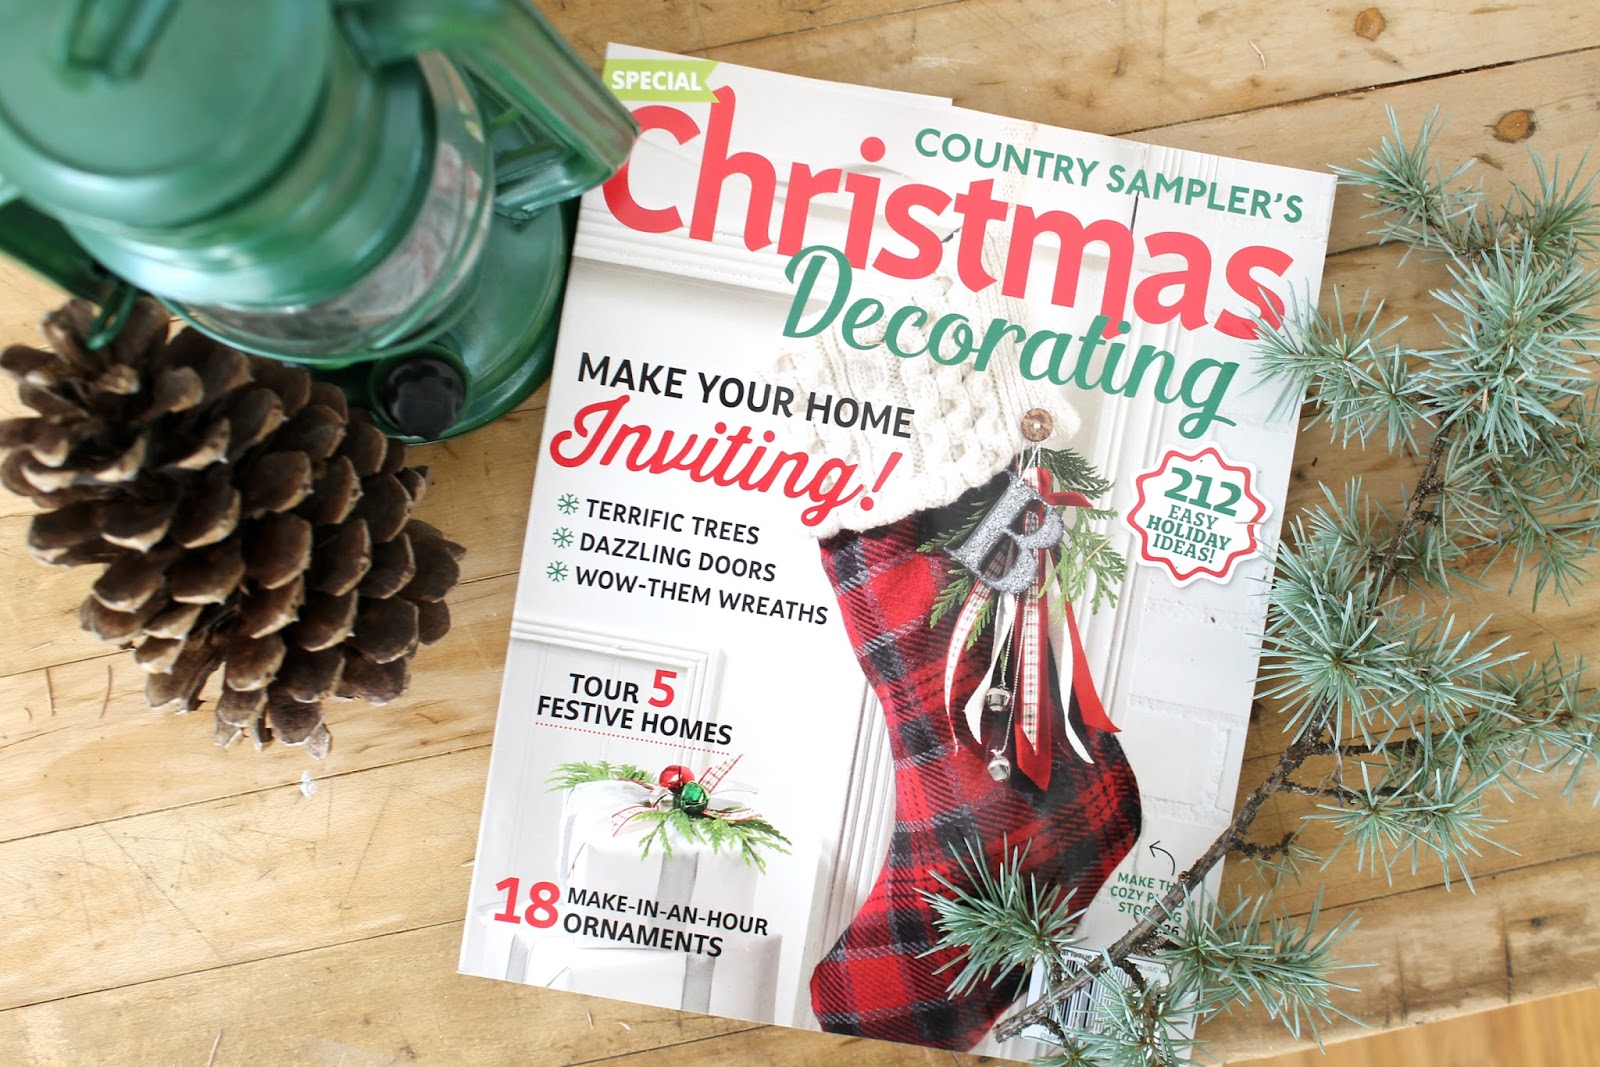 Featured in Country Sampler's Christmas Decorating Magazine